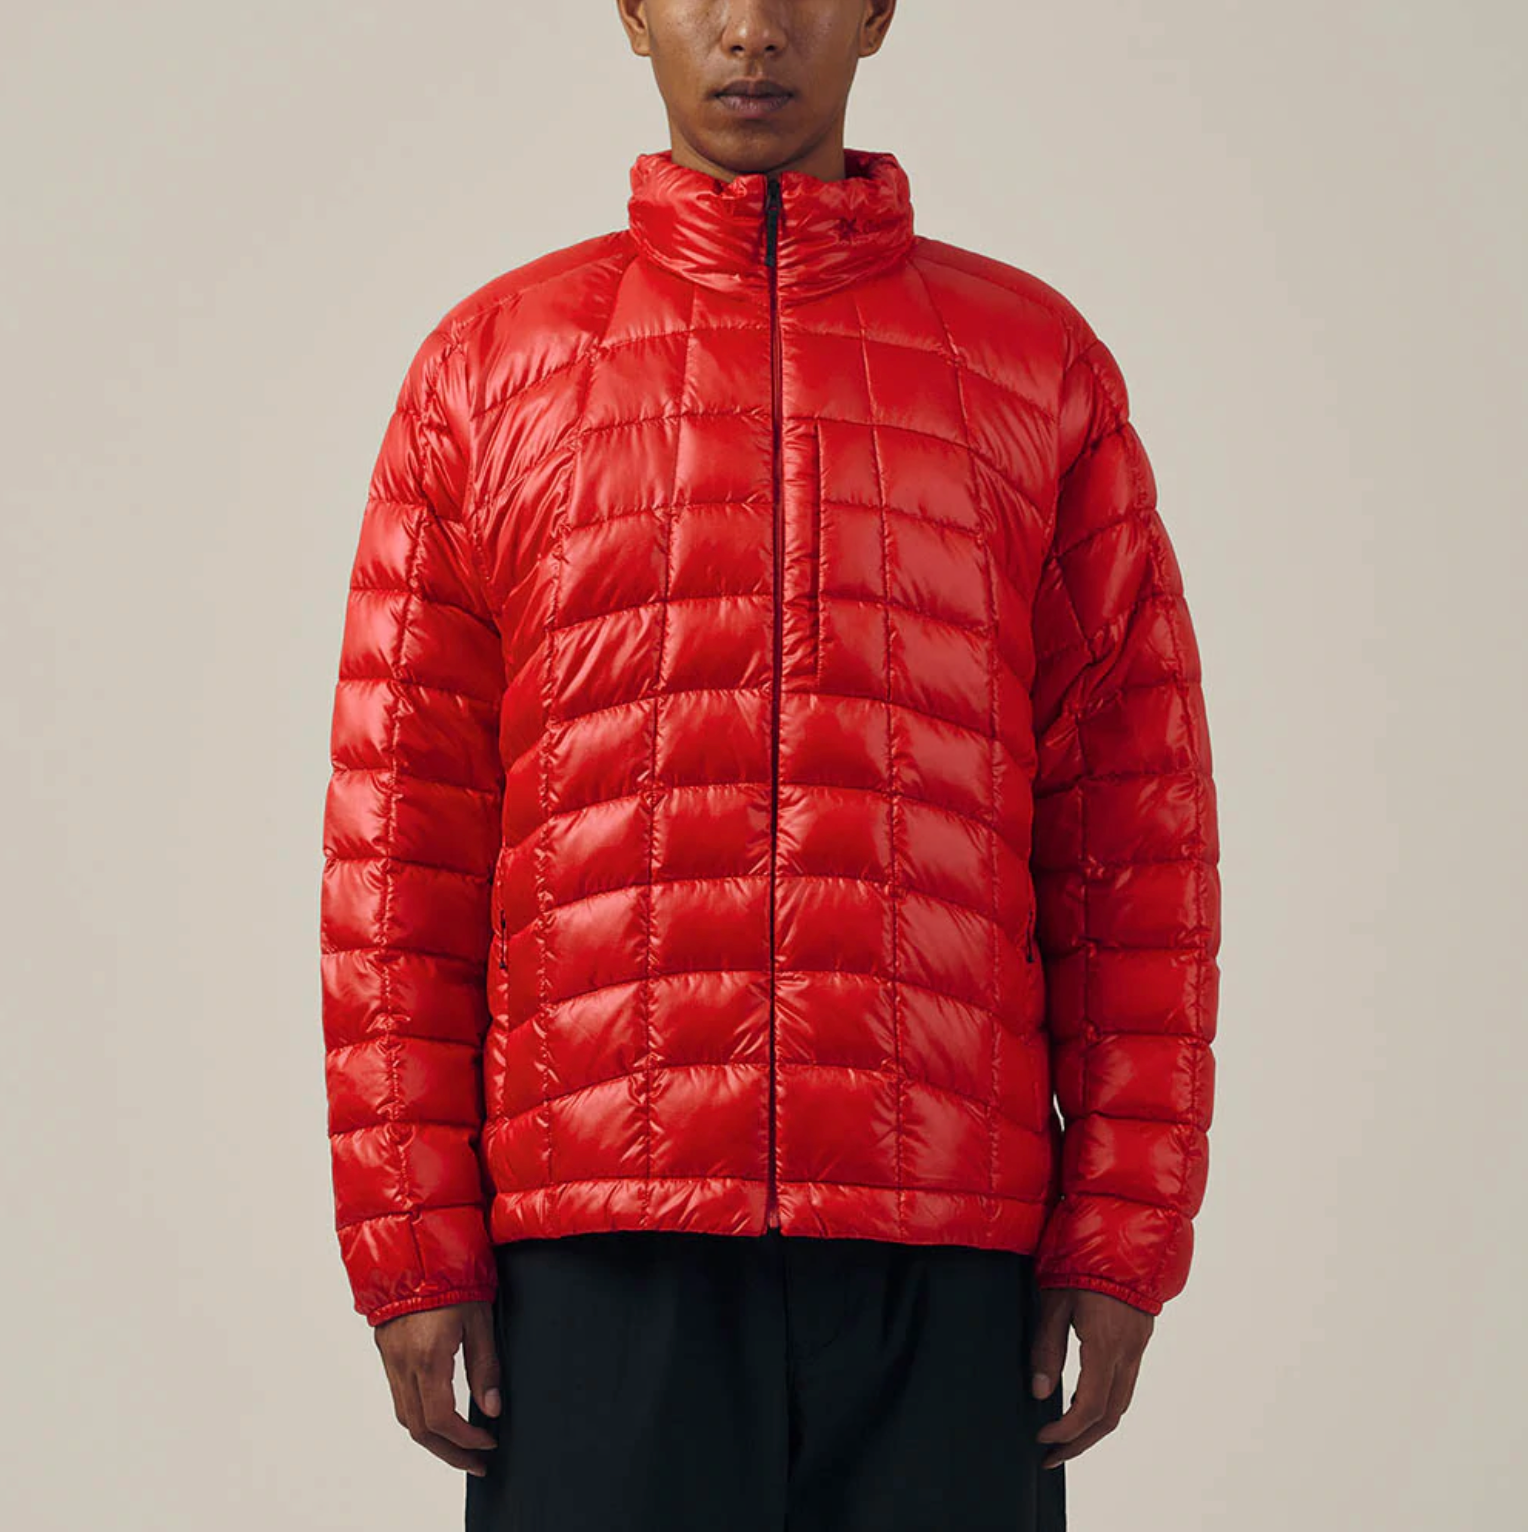 Fly Air Down Jacket